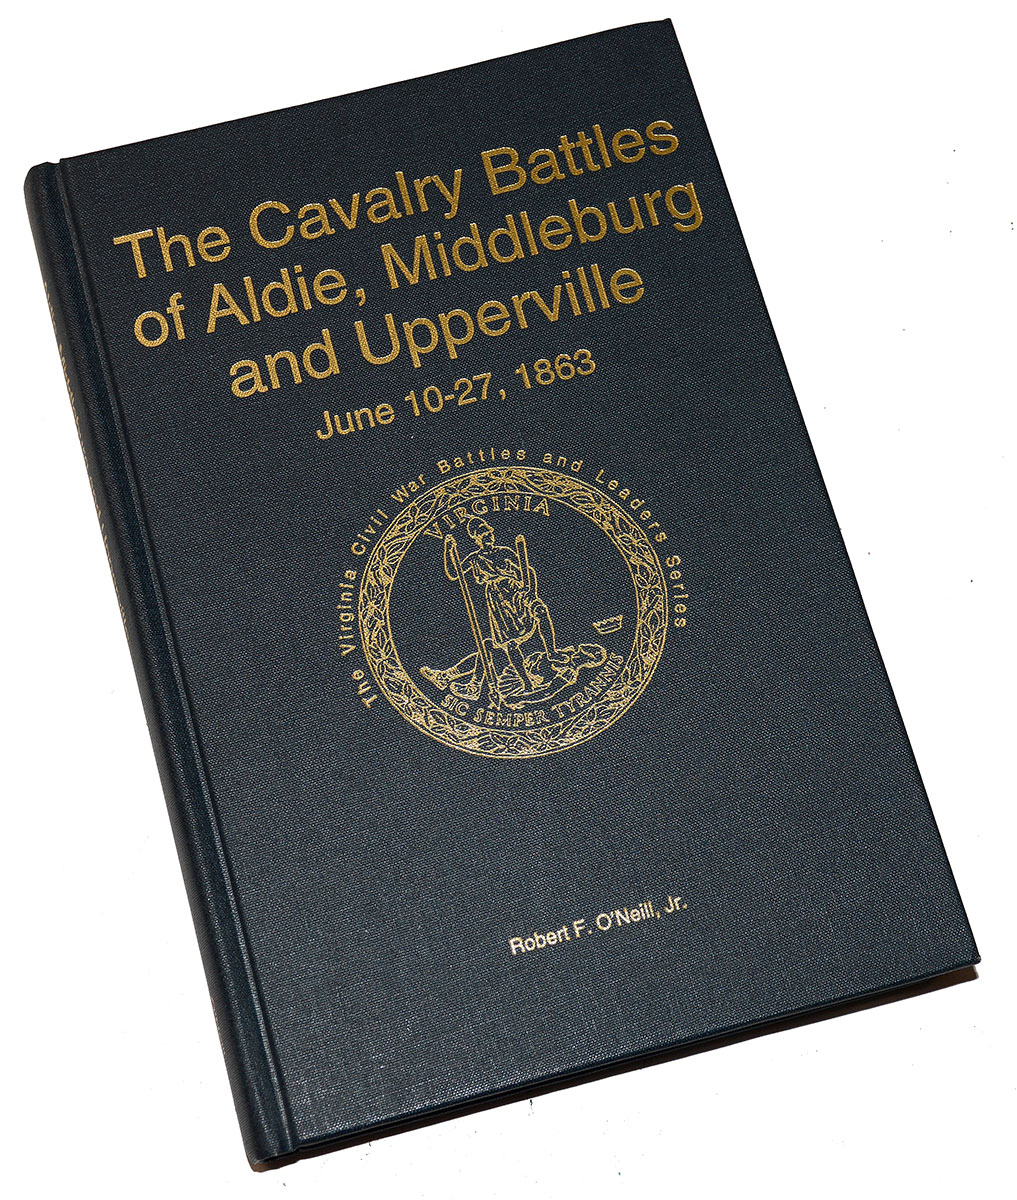 SECOND EDITION COPY OF A STUDY ON THE CAVALRY BATTLES IN THE GETTYSBURG CAMPAIGN